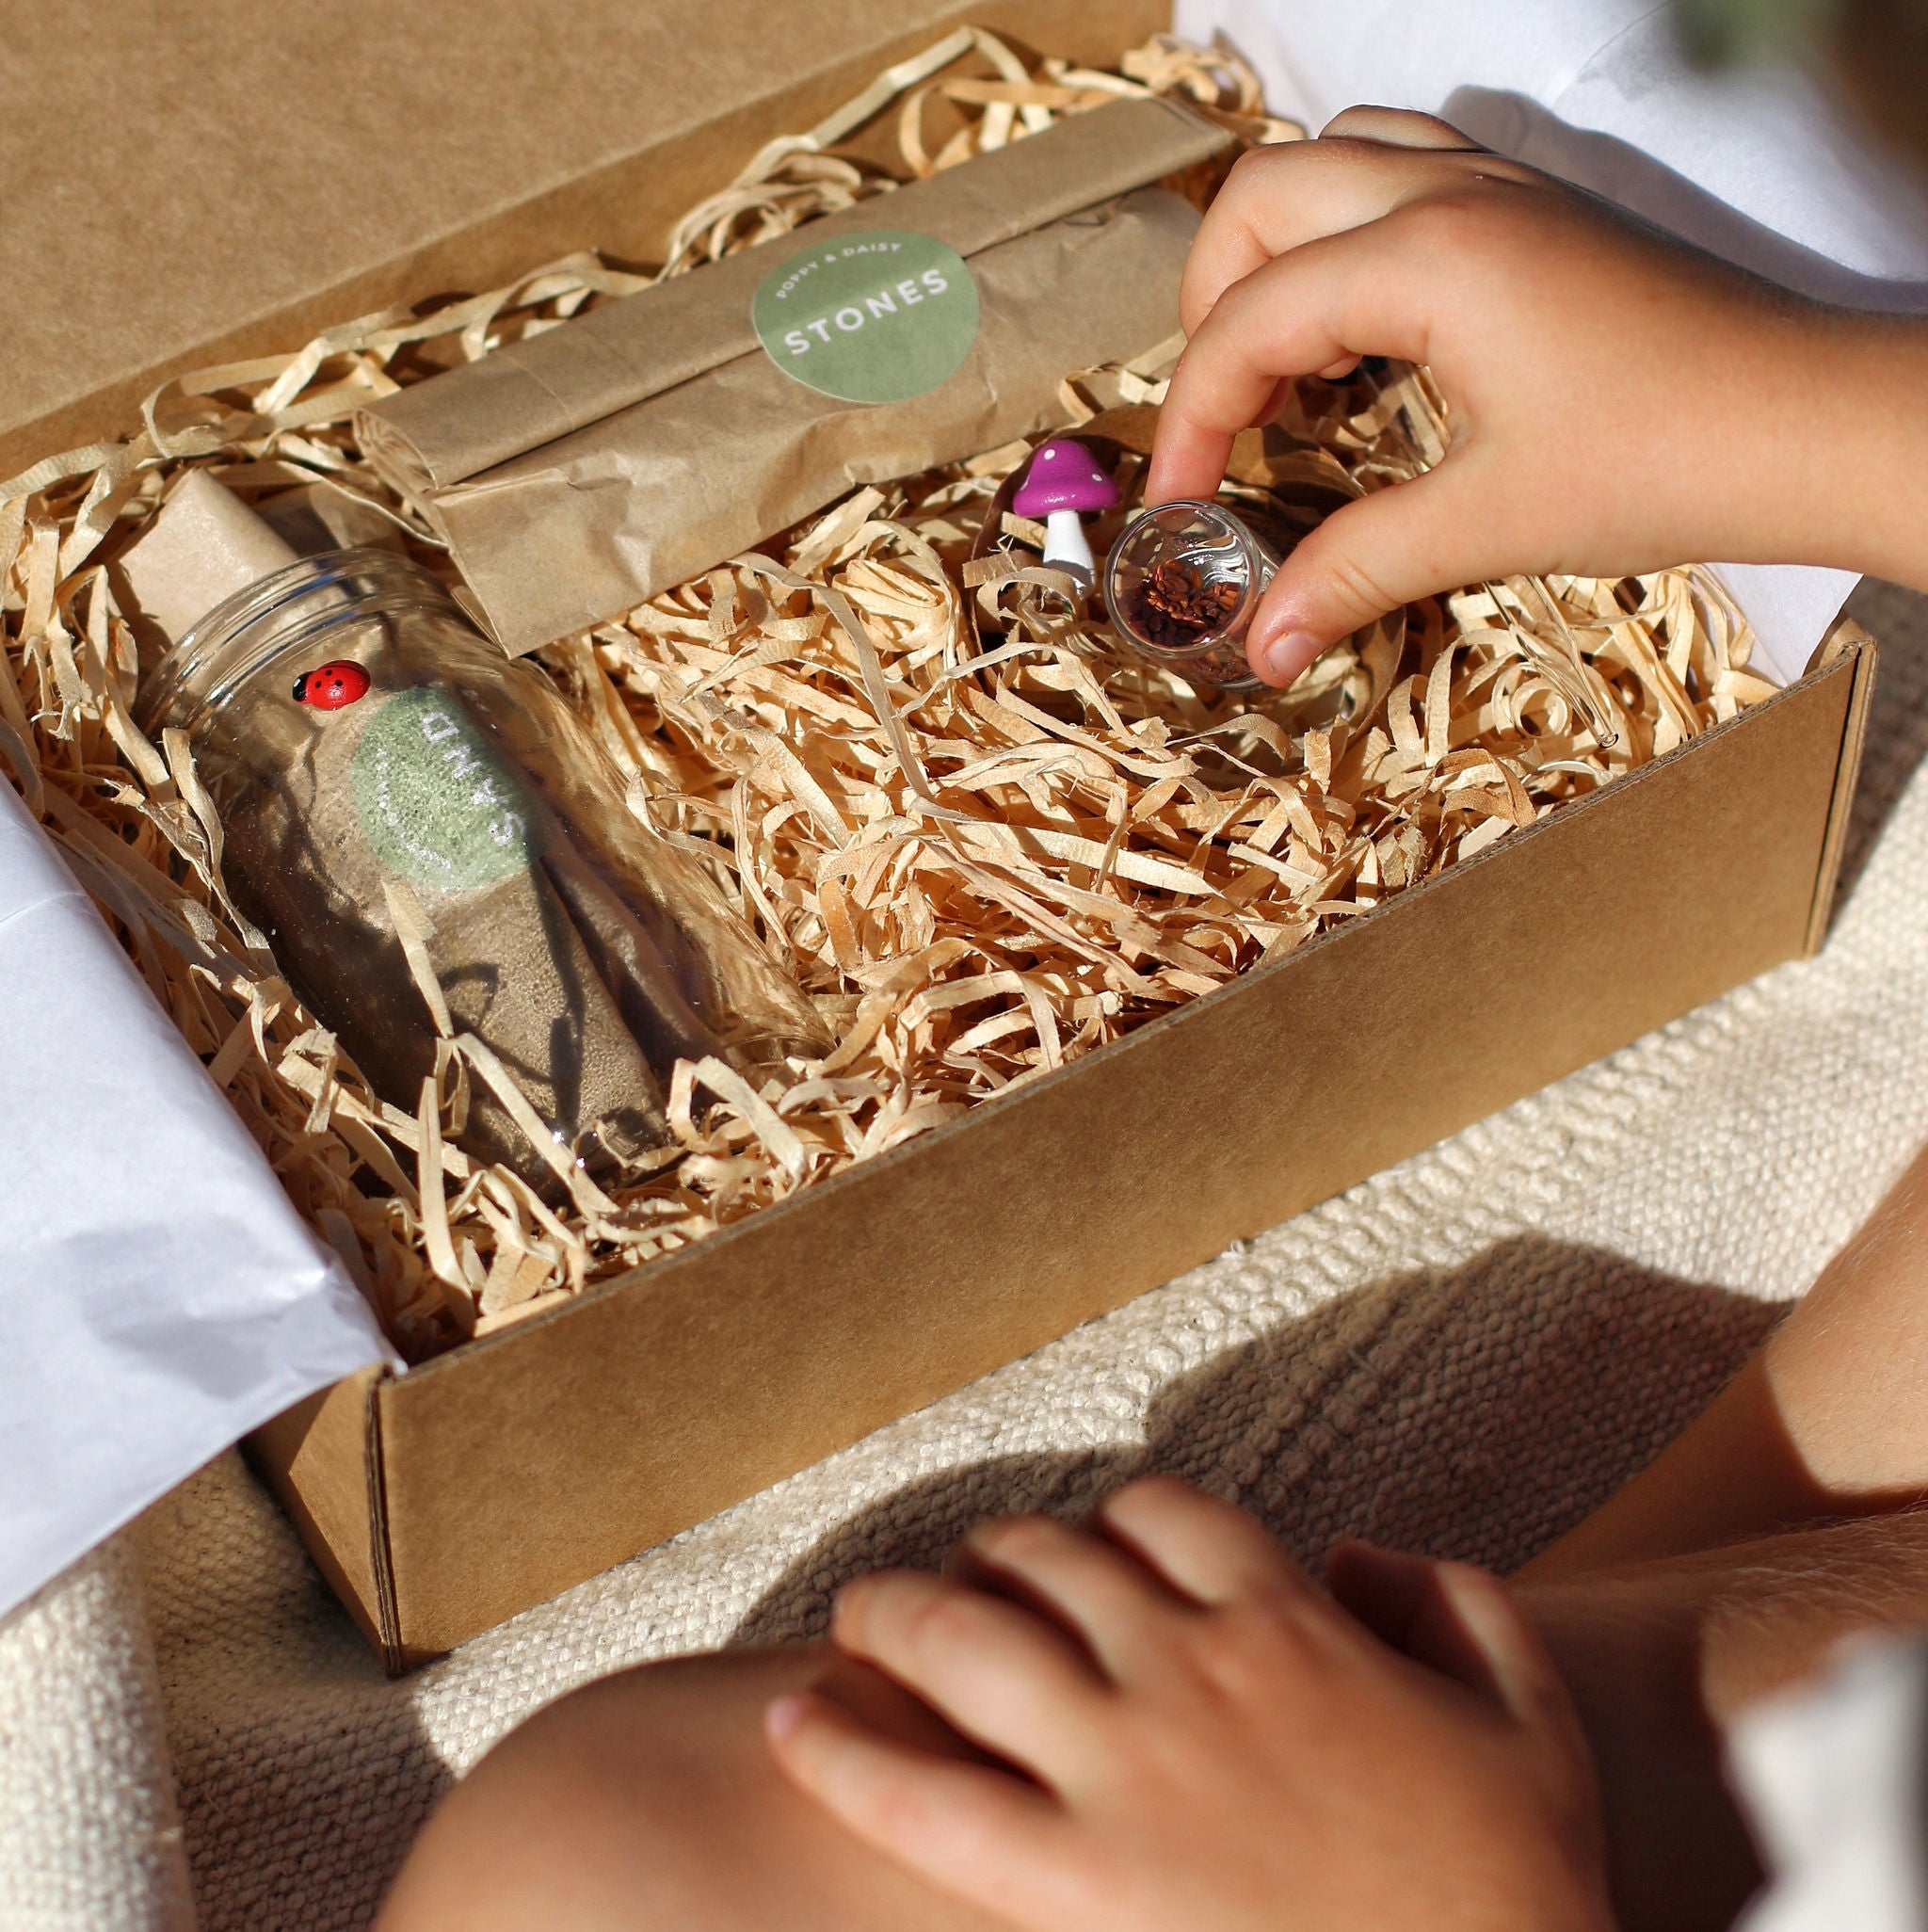 Poppy and daisy mini fairy garden kit box open showing contents with girls hands holding bottle of seeds